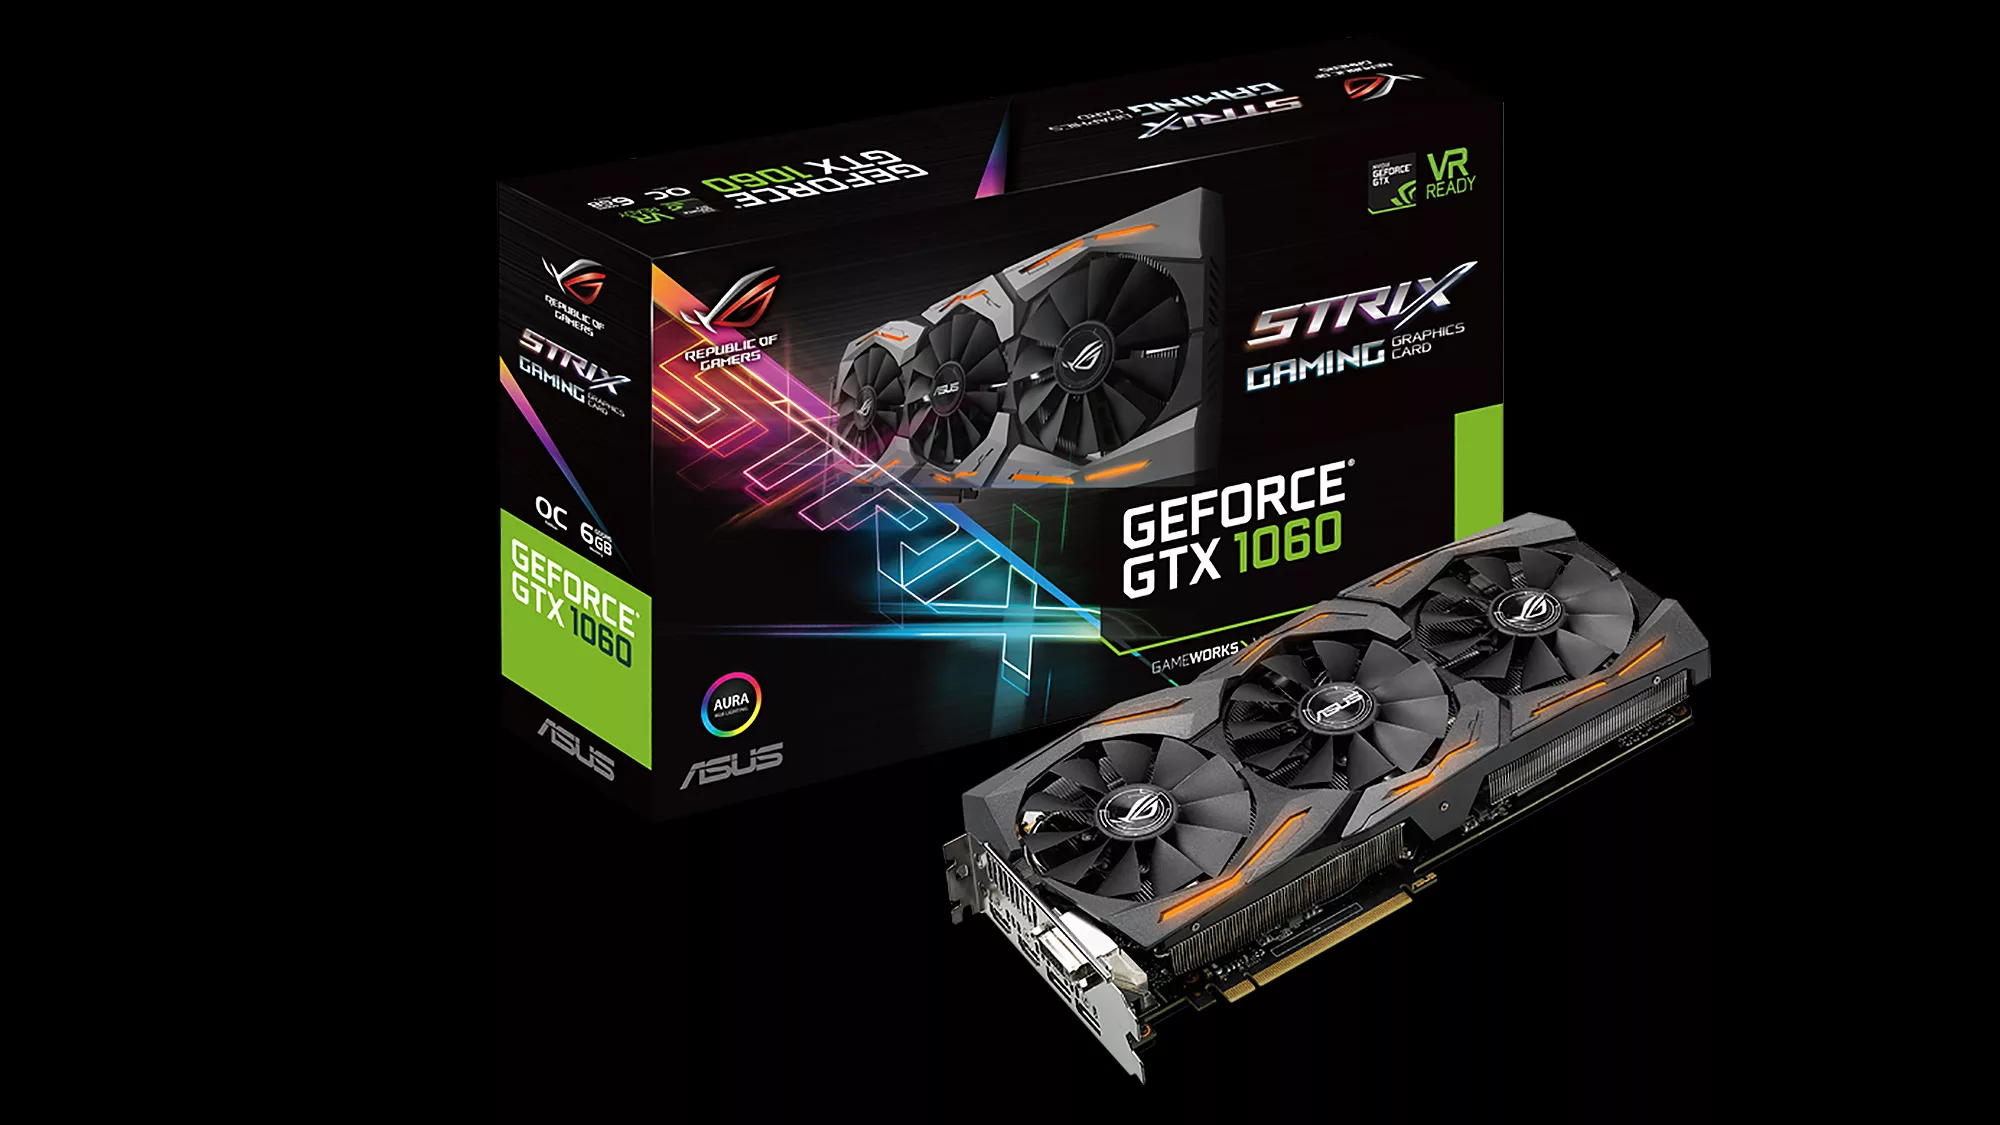 Uforenelig Niende voldtage ROG Strix GTX 1060 review and gaming performance tested by meankeys | ROG -  Republic of Gamers Global